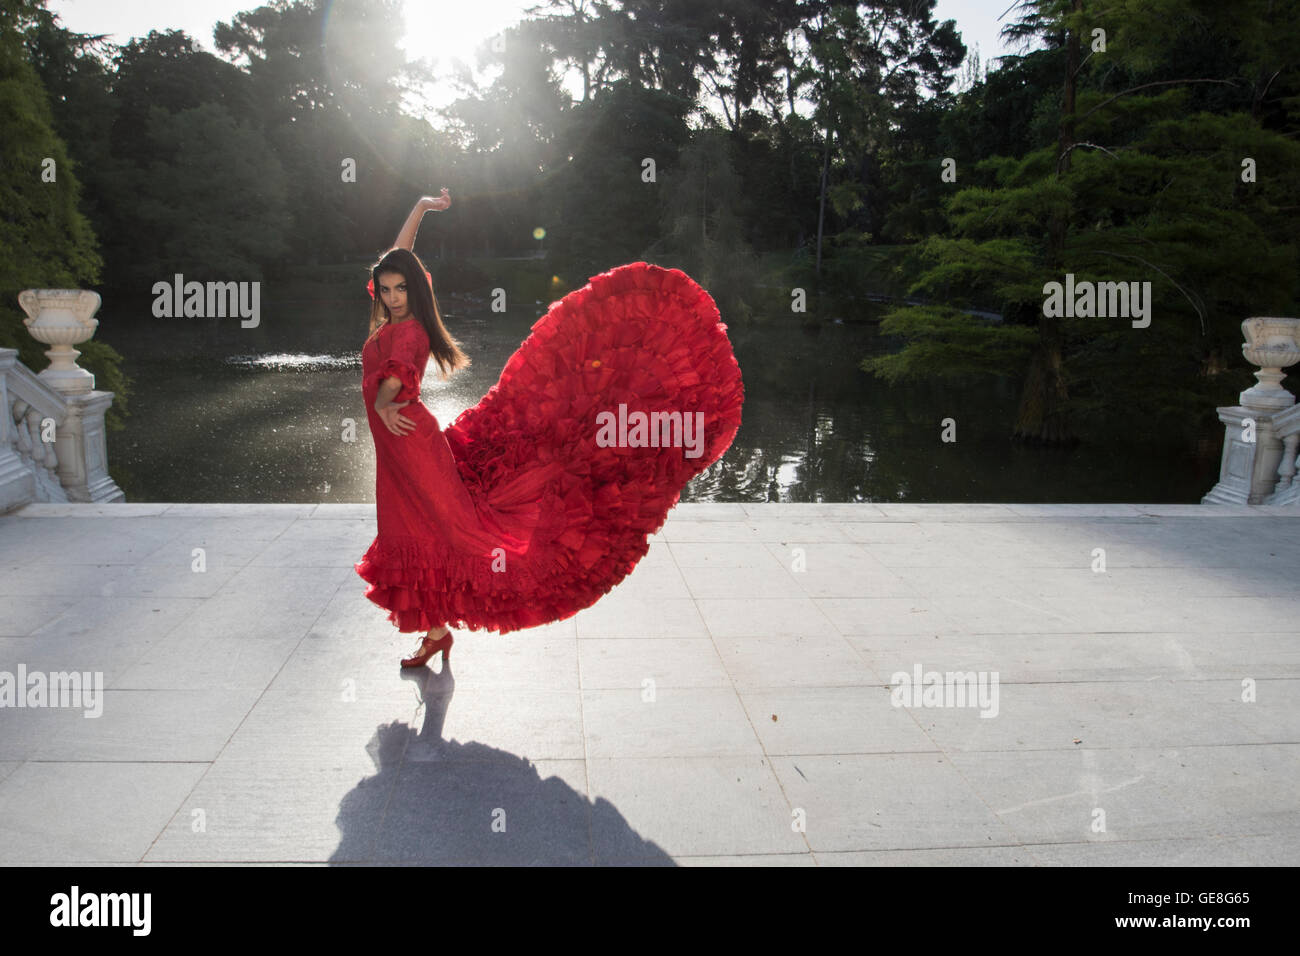 Woman dressed in red dancing flamenco on a terrace in front of a lake Stock Photo